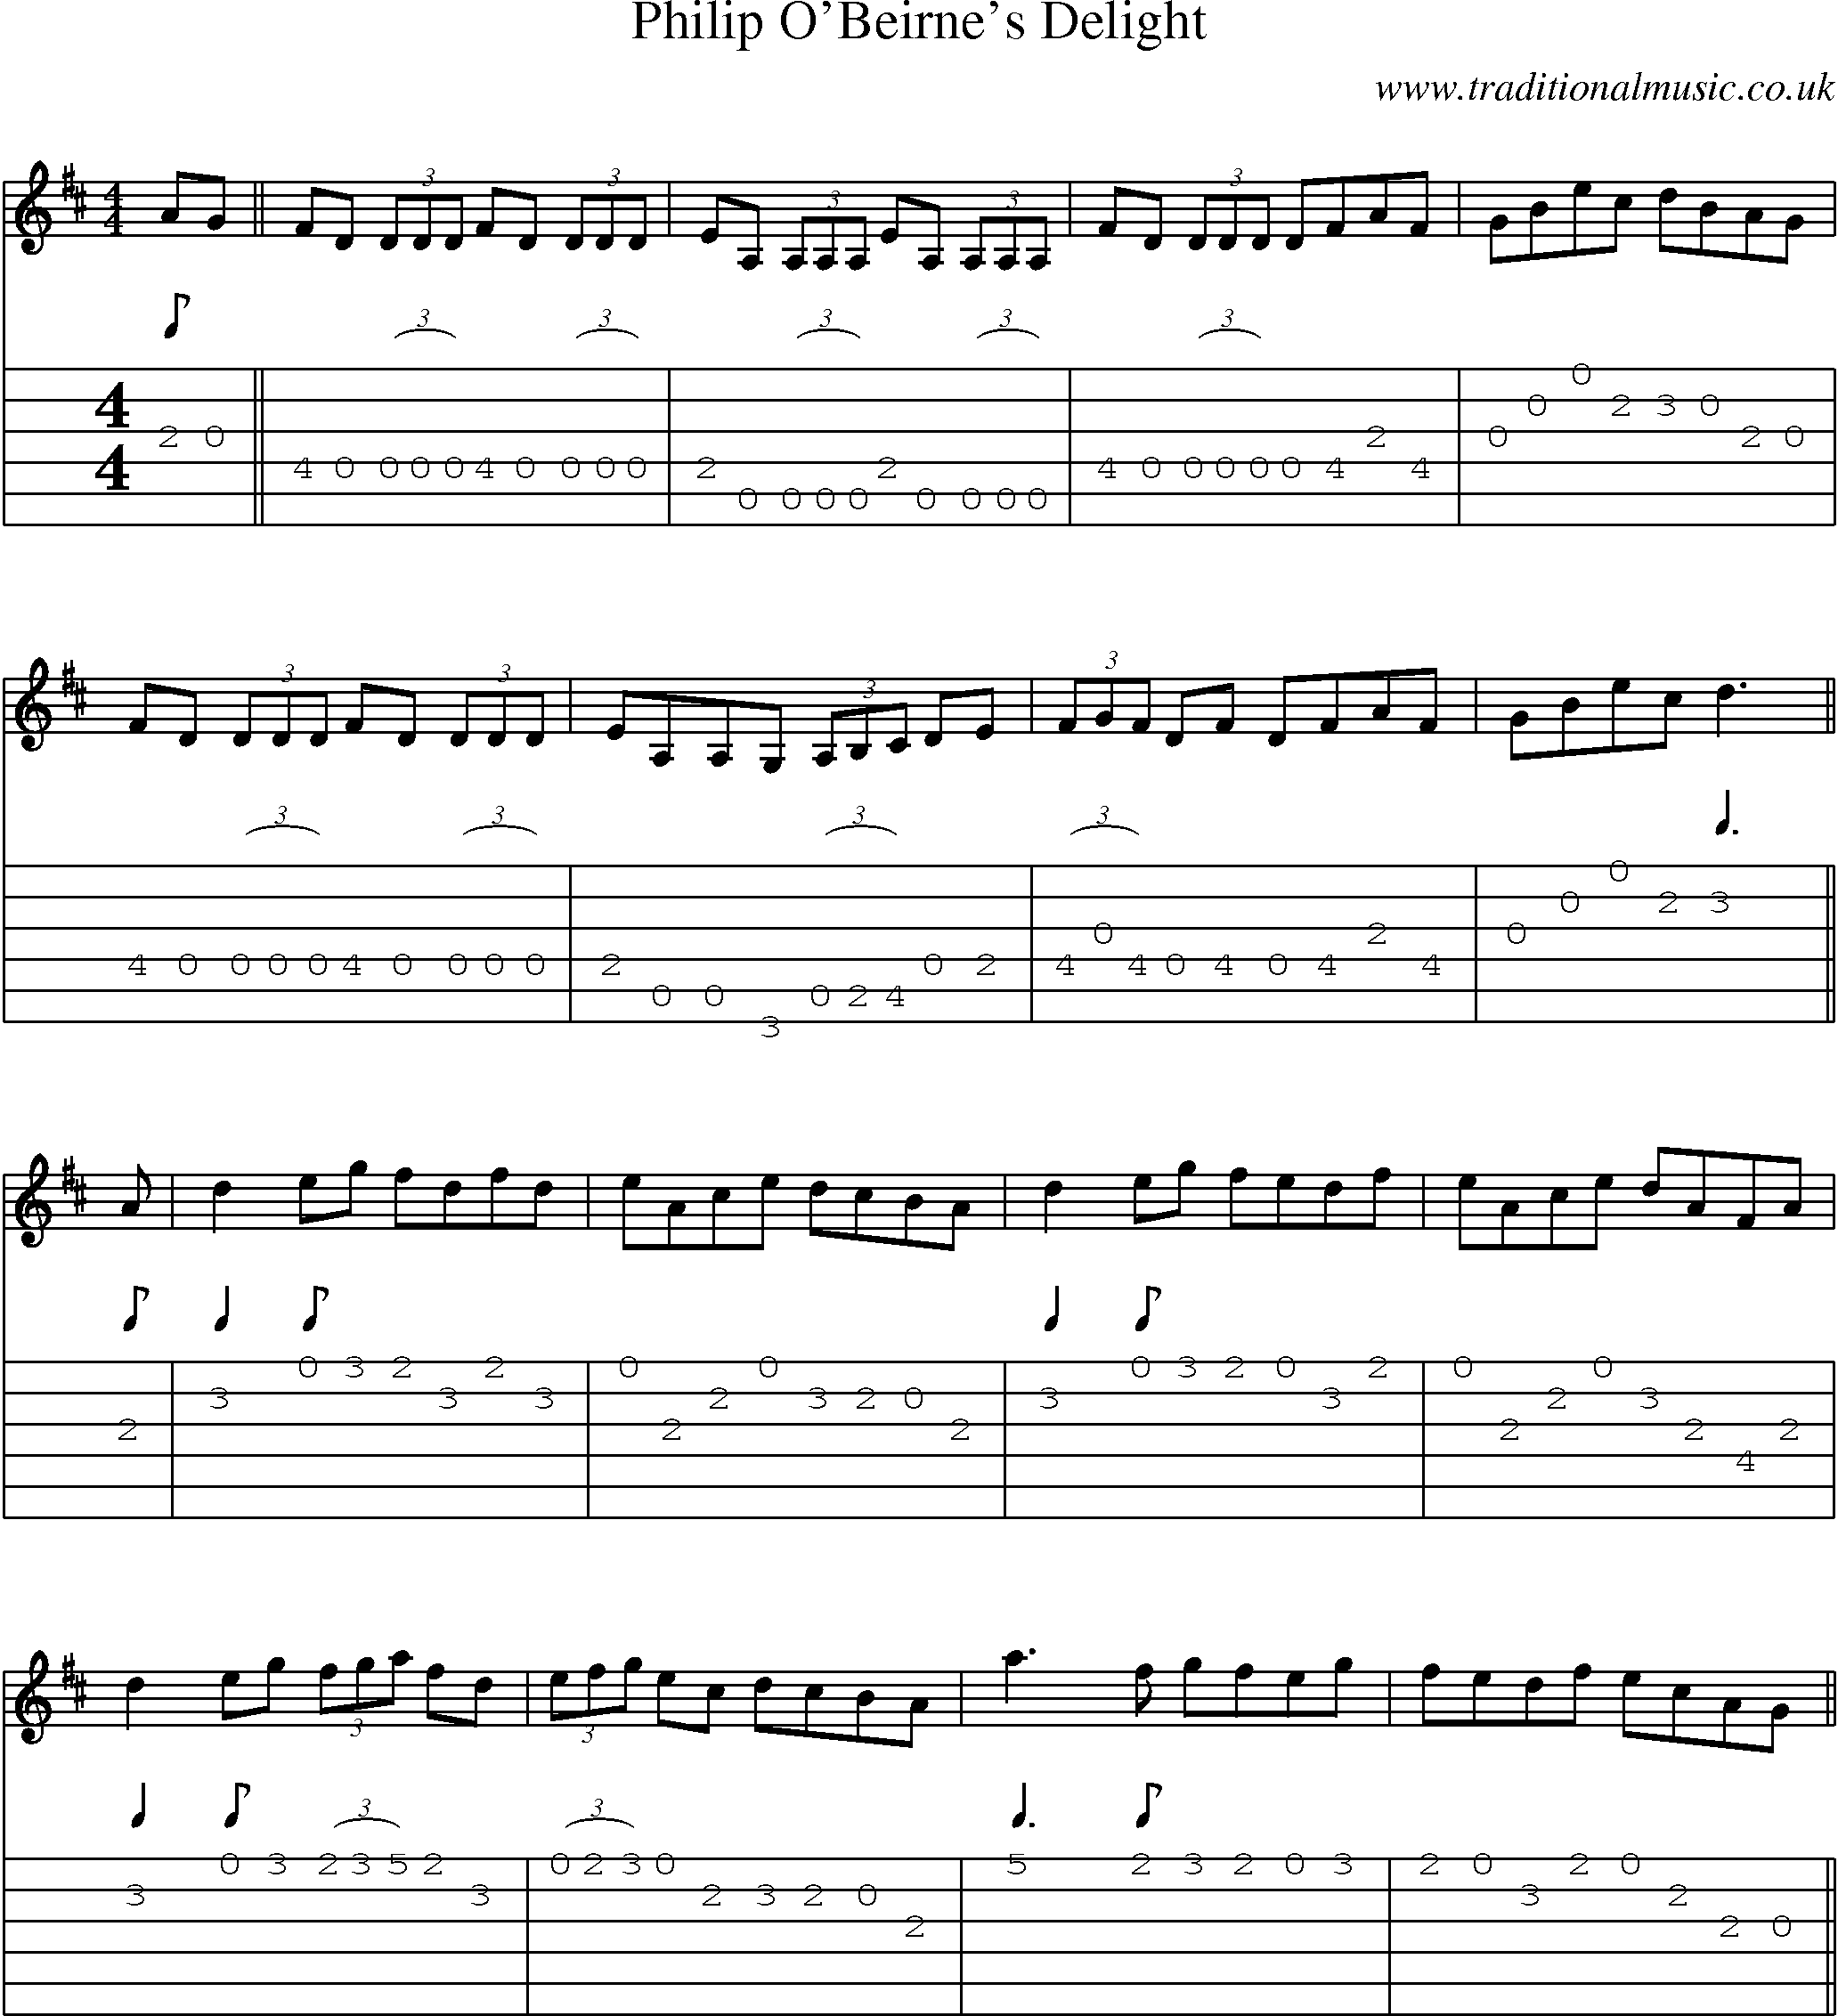 Music Score and Guitar Tabs for Philip Obeirnes Delight